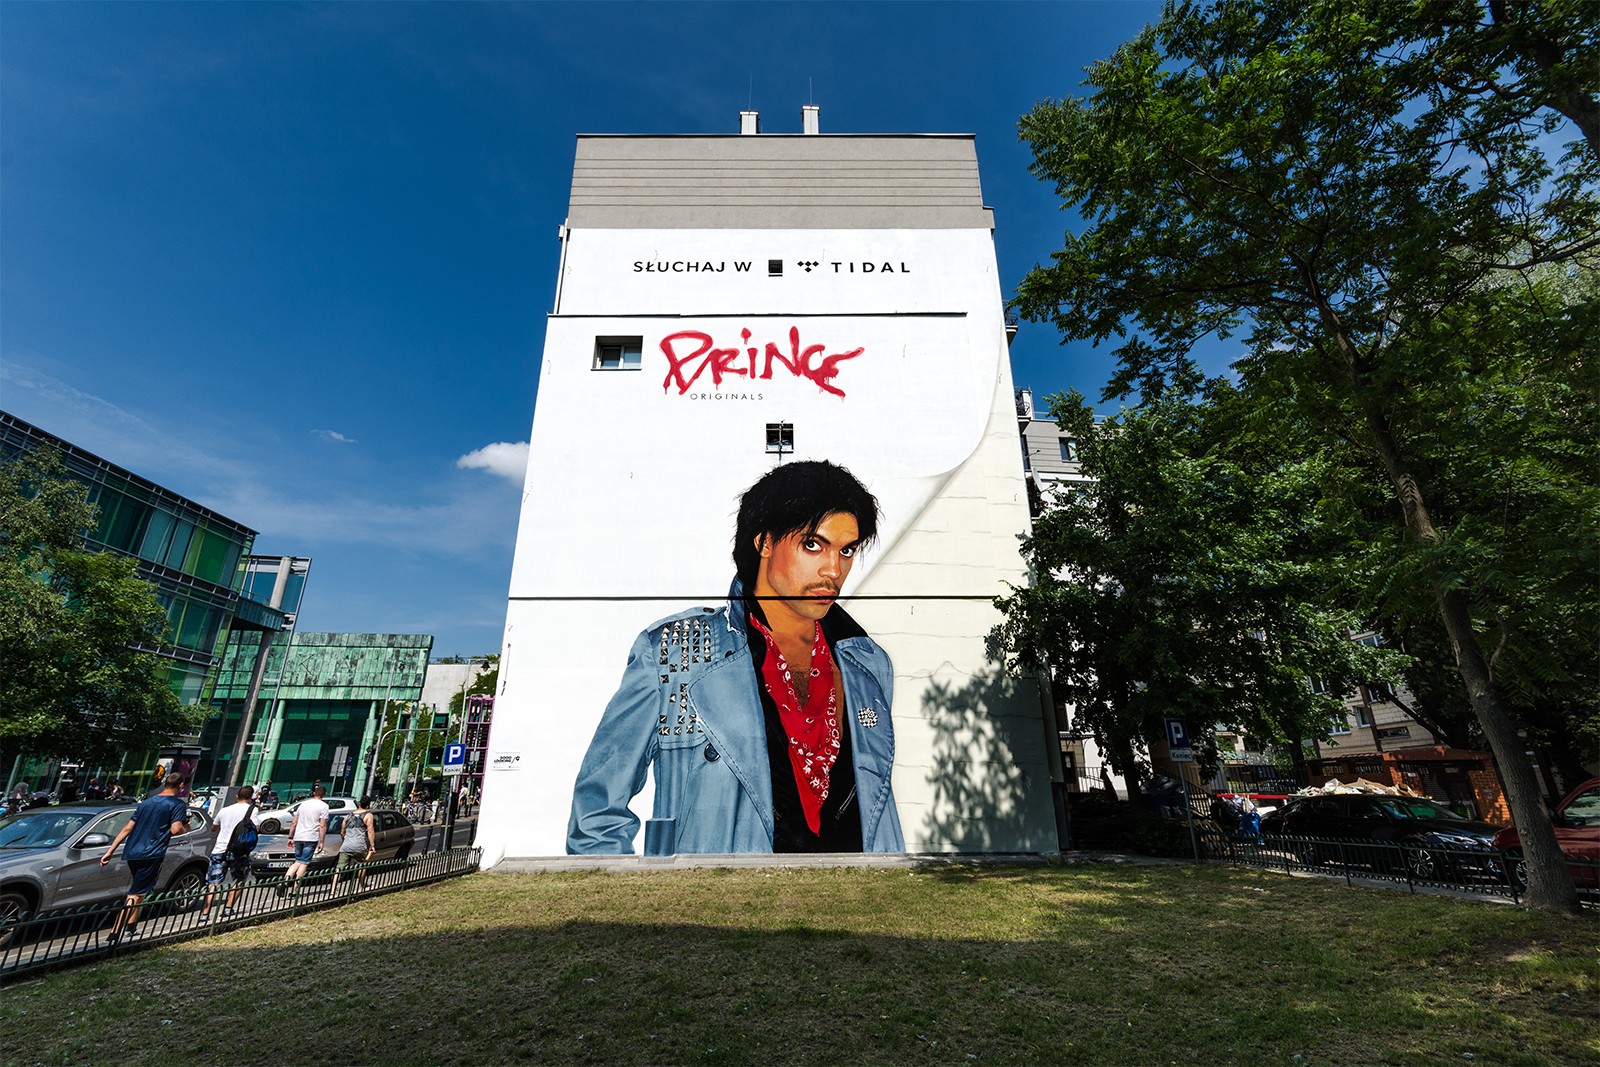 Advertising mural promoting the Prince album for the Tidal client in Warsaw | Tidal x Prince | Portfolio